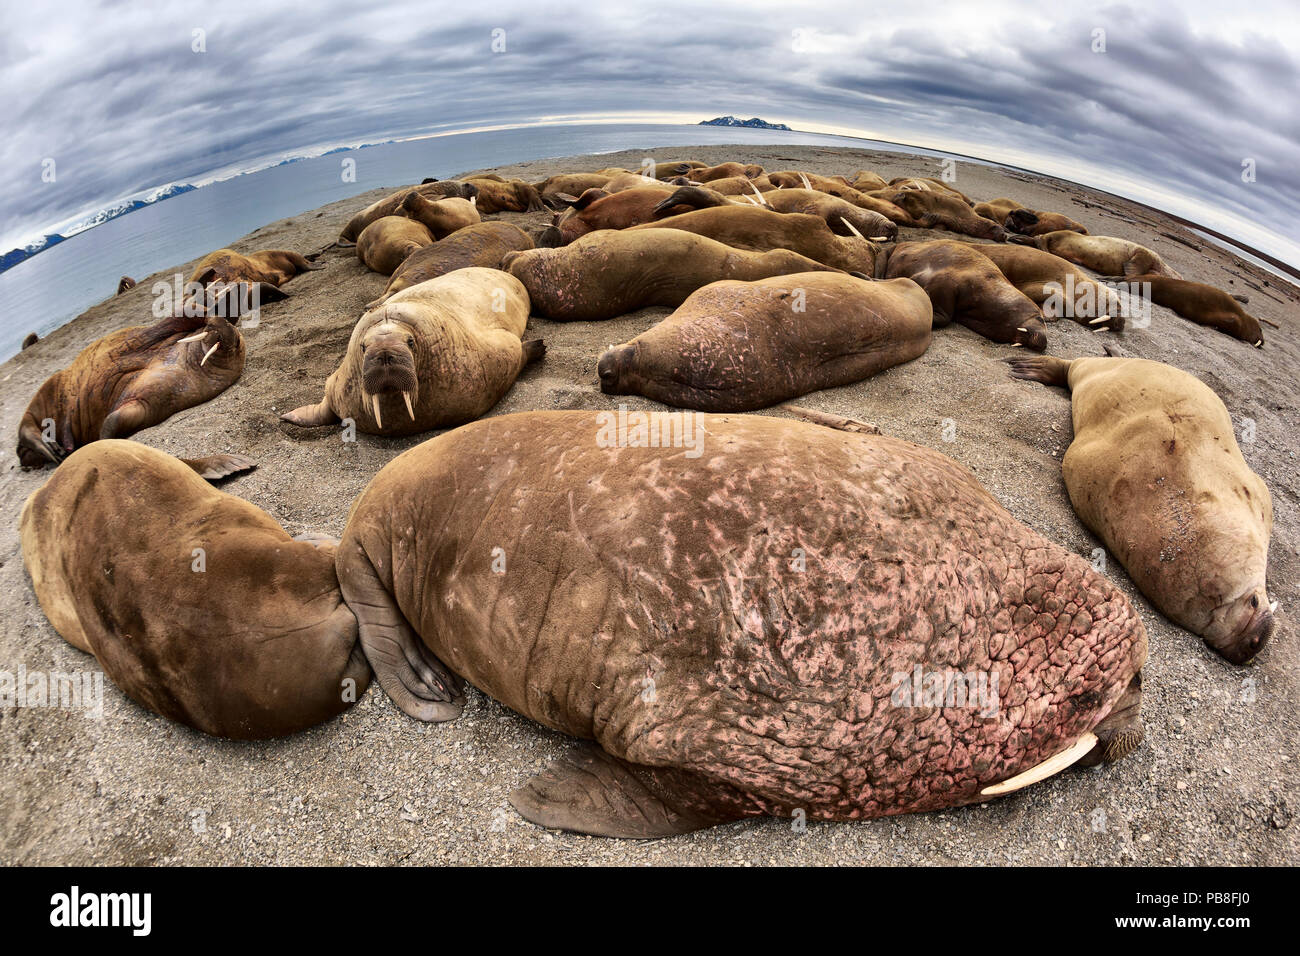 Atlantic walruses (Odobenus rosmarus rosmarus) wide angle view of large colony hauled up on a sandy beach area to rest, Svalbard, Norway, June Stock Photo